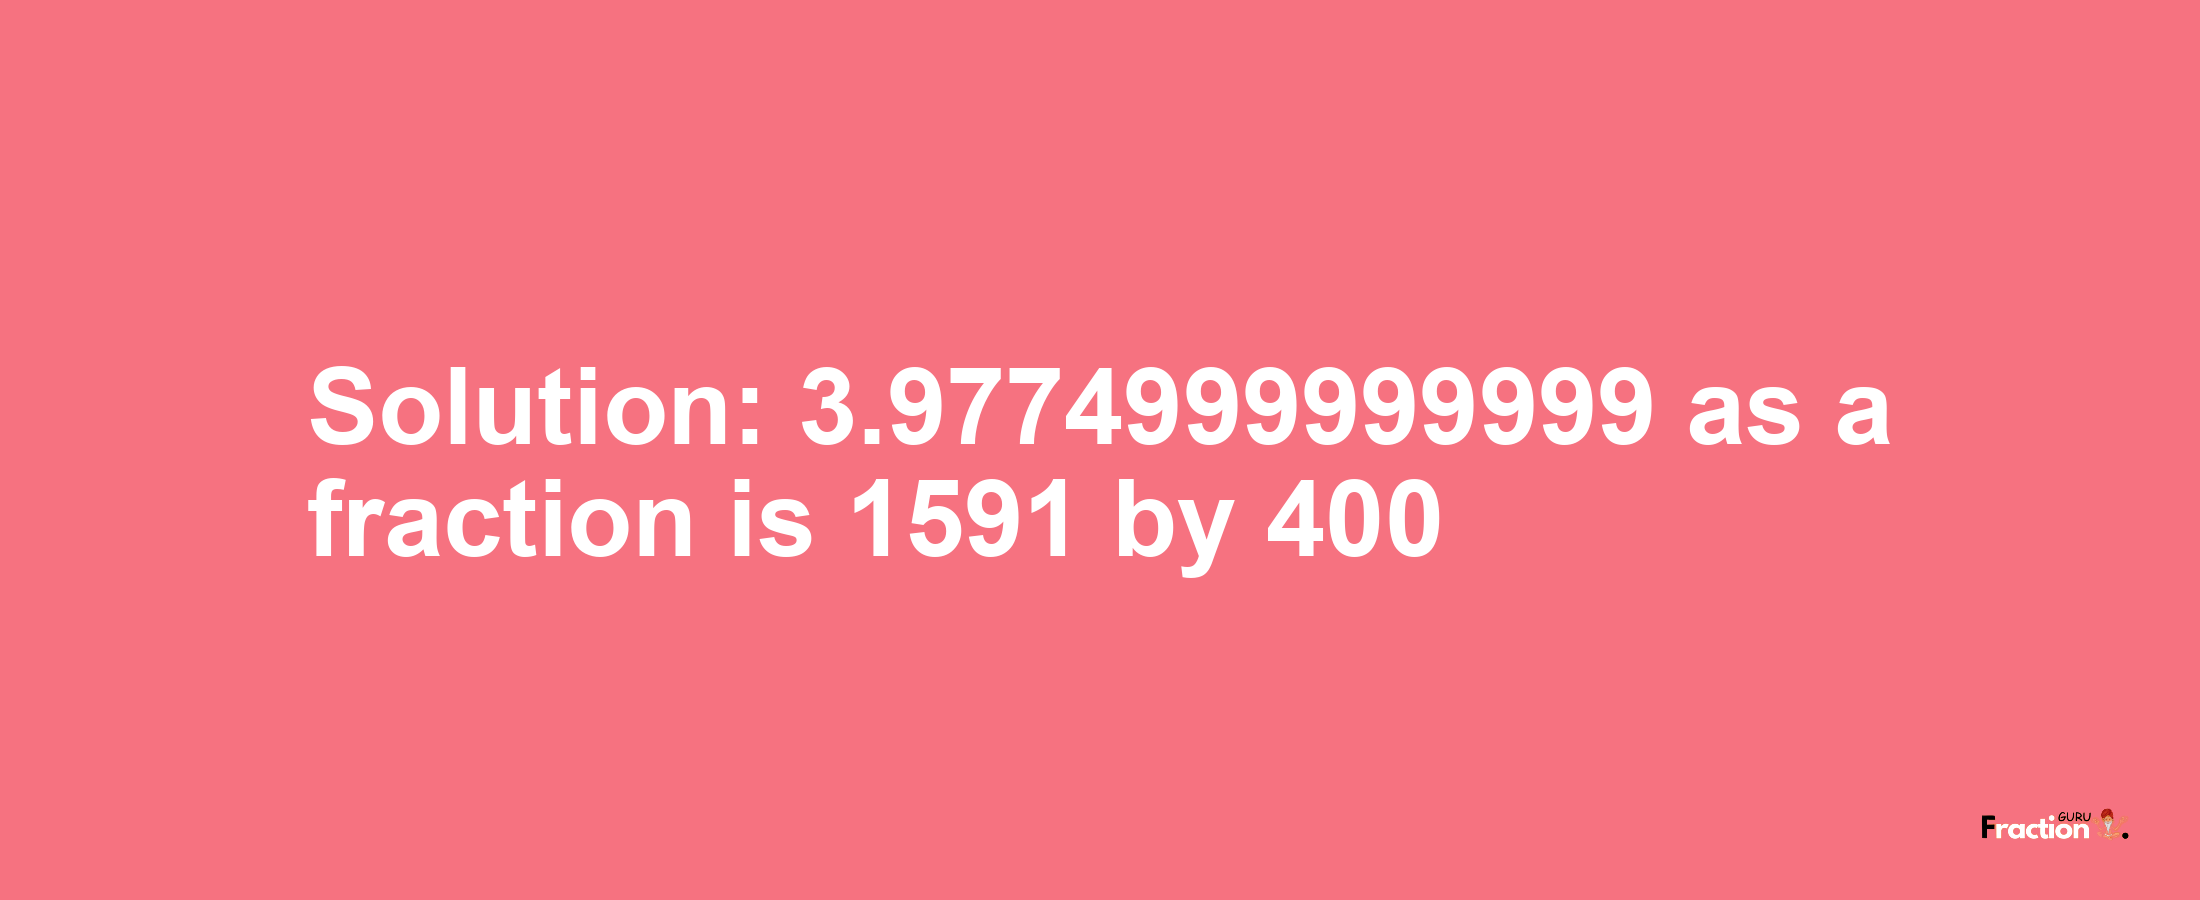 Solution:3.9774999999999 as a fraction is 1591/400